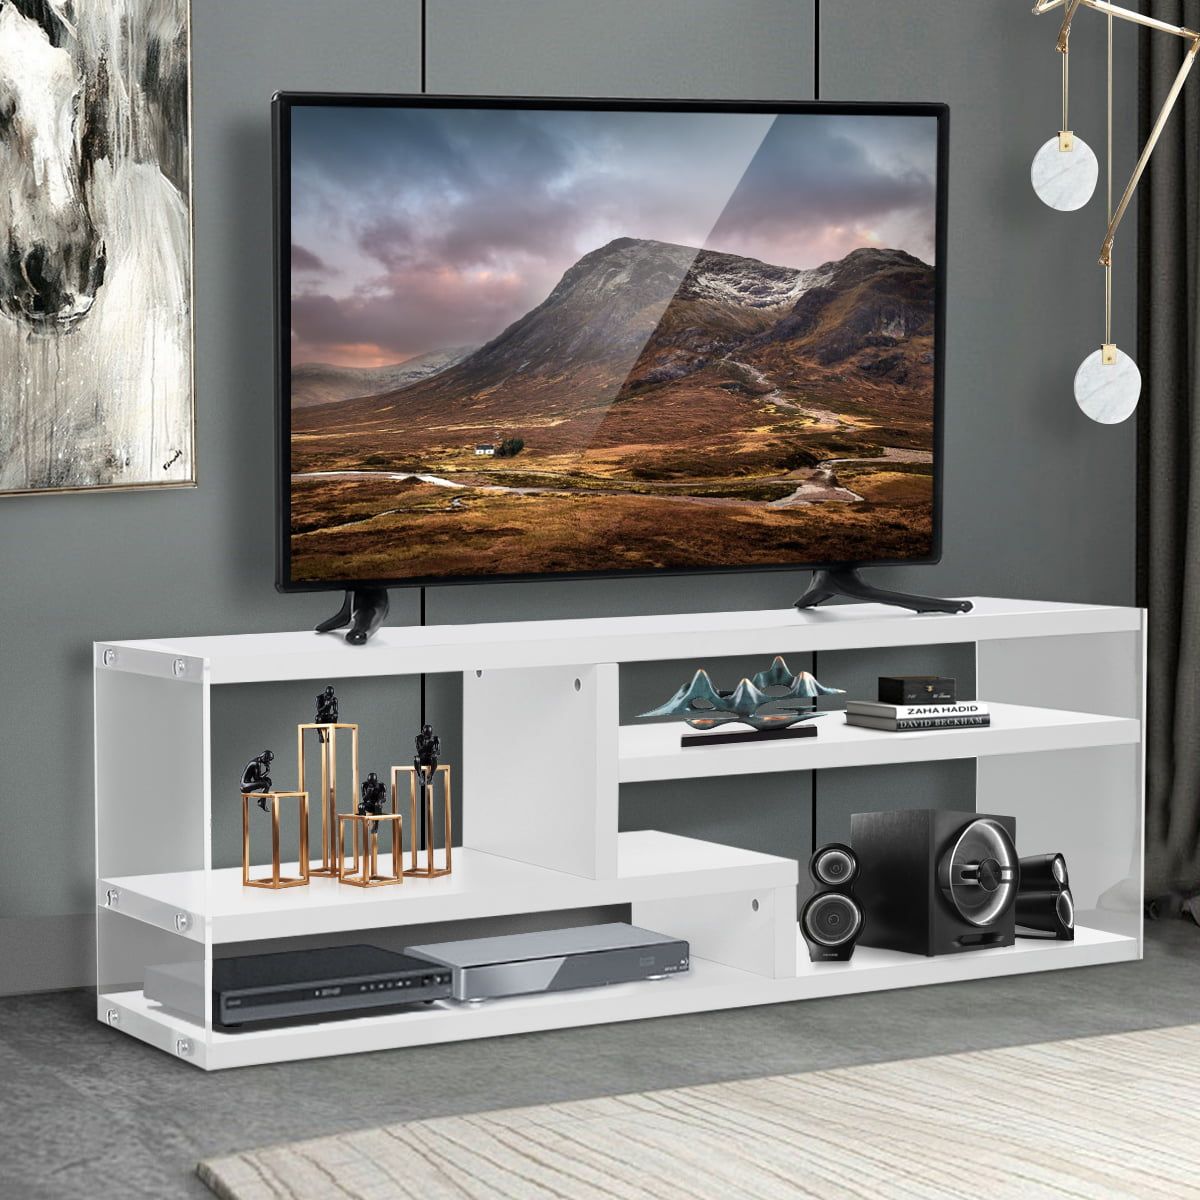 51 White Wood Tv Stand With Acrylic For Tvs Up To 55 India | Ubuy In Modern Stands With Shelves (View 3 of 15)